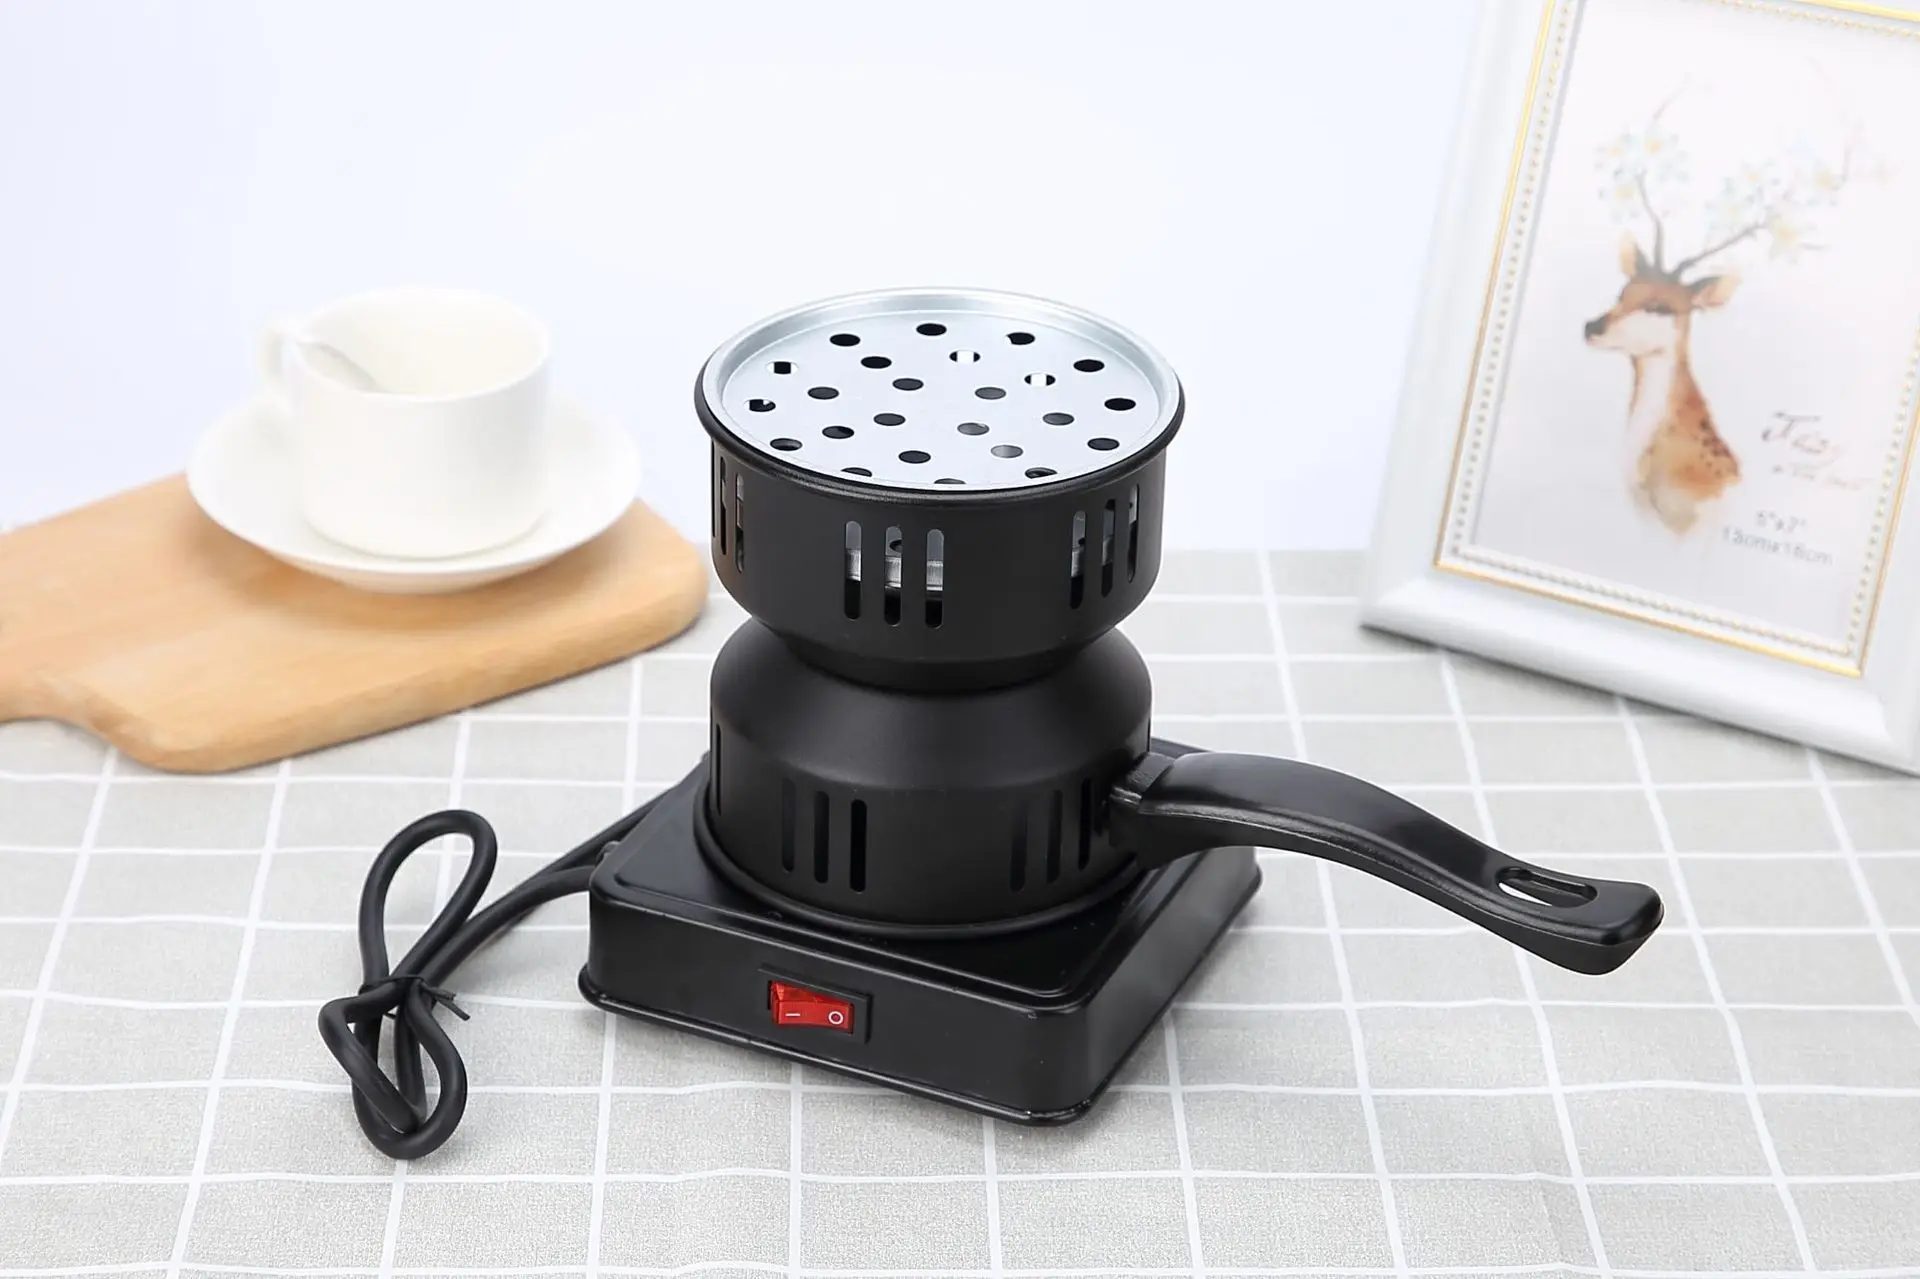 DD049  Wholesale Arab Cube Coconut Carbon Oven  Shisha Point Charcoal Furnace Portable Heating Charcoal Stove